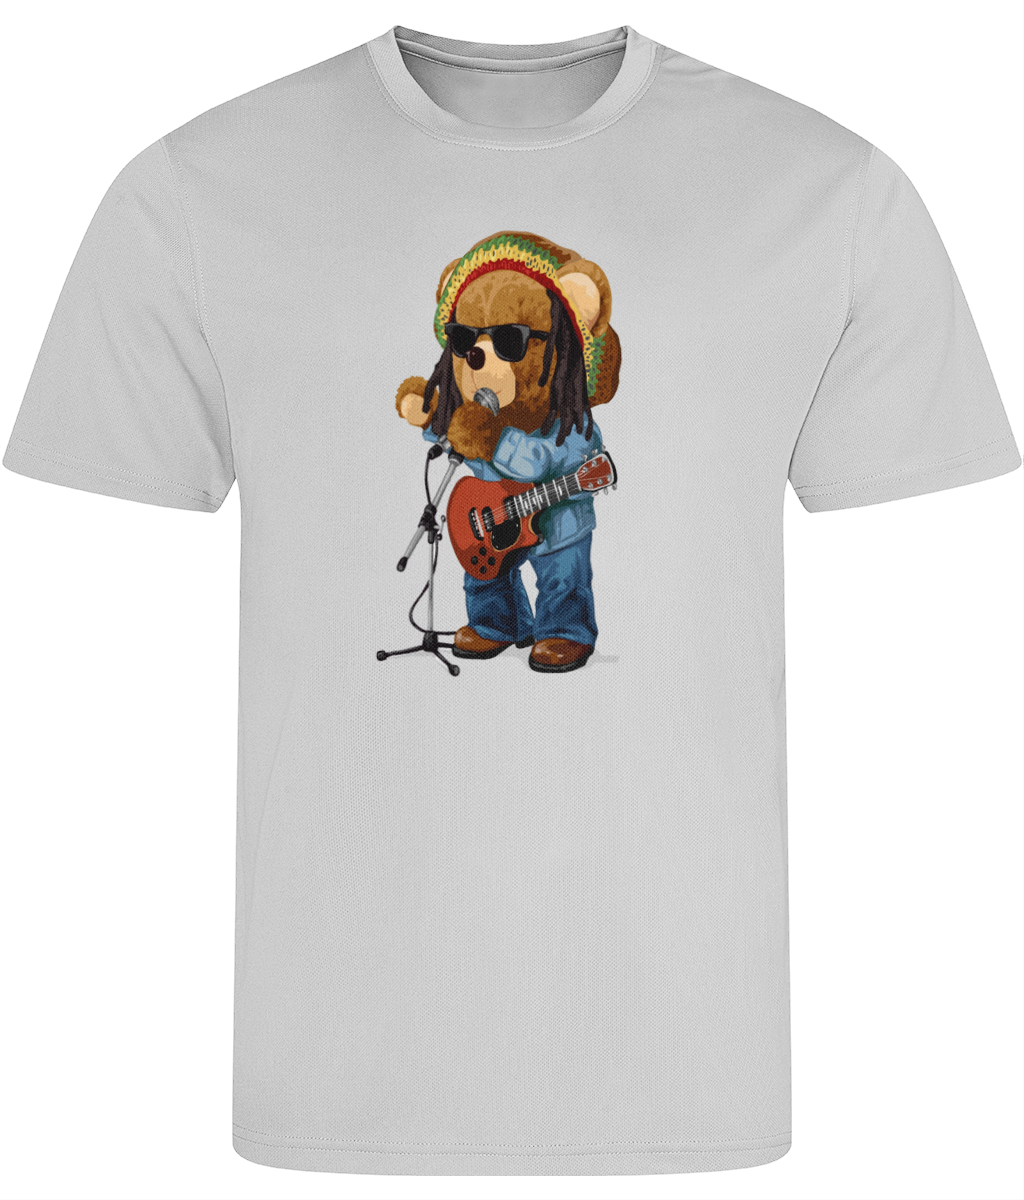 Children's Rasta Bear T-shirt - Various Colours Available - FAST UK DELIVERY